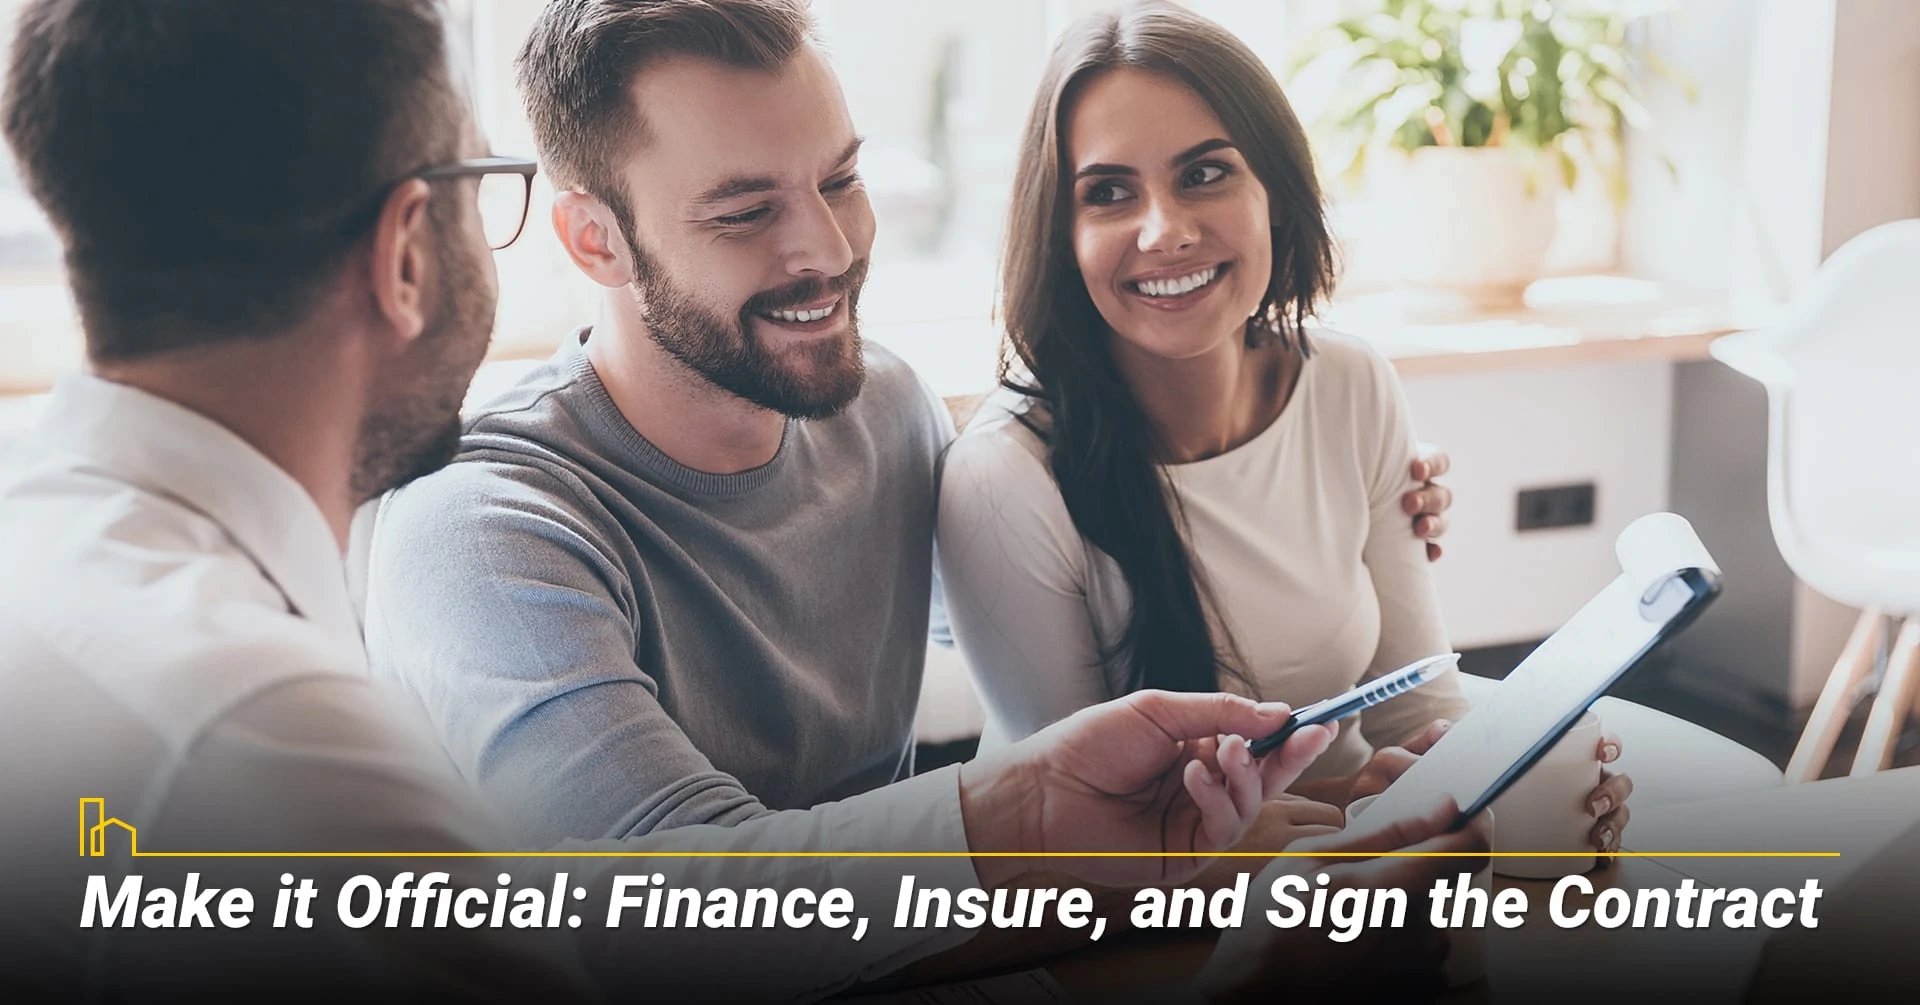 Make it Official: Finance, Insure, and Sign the Contract, get through the final steps